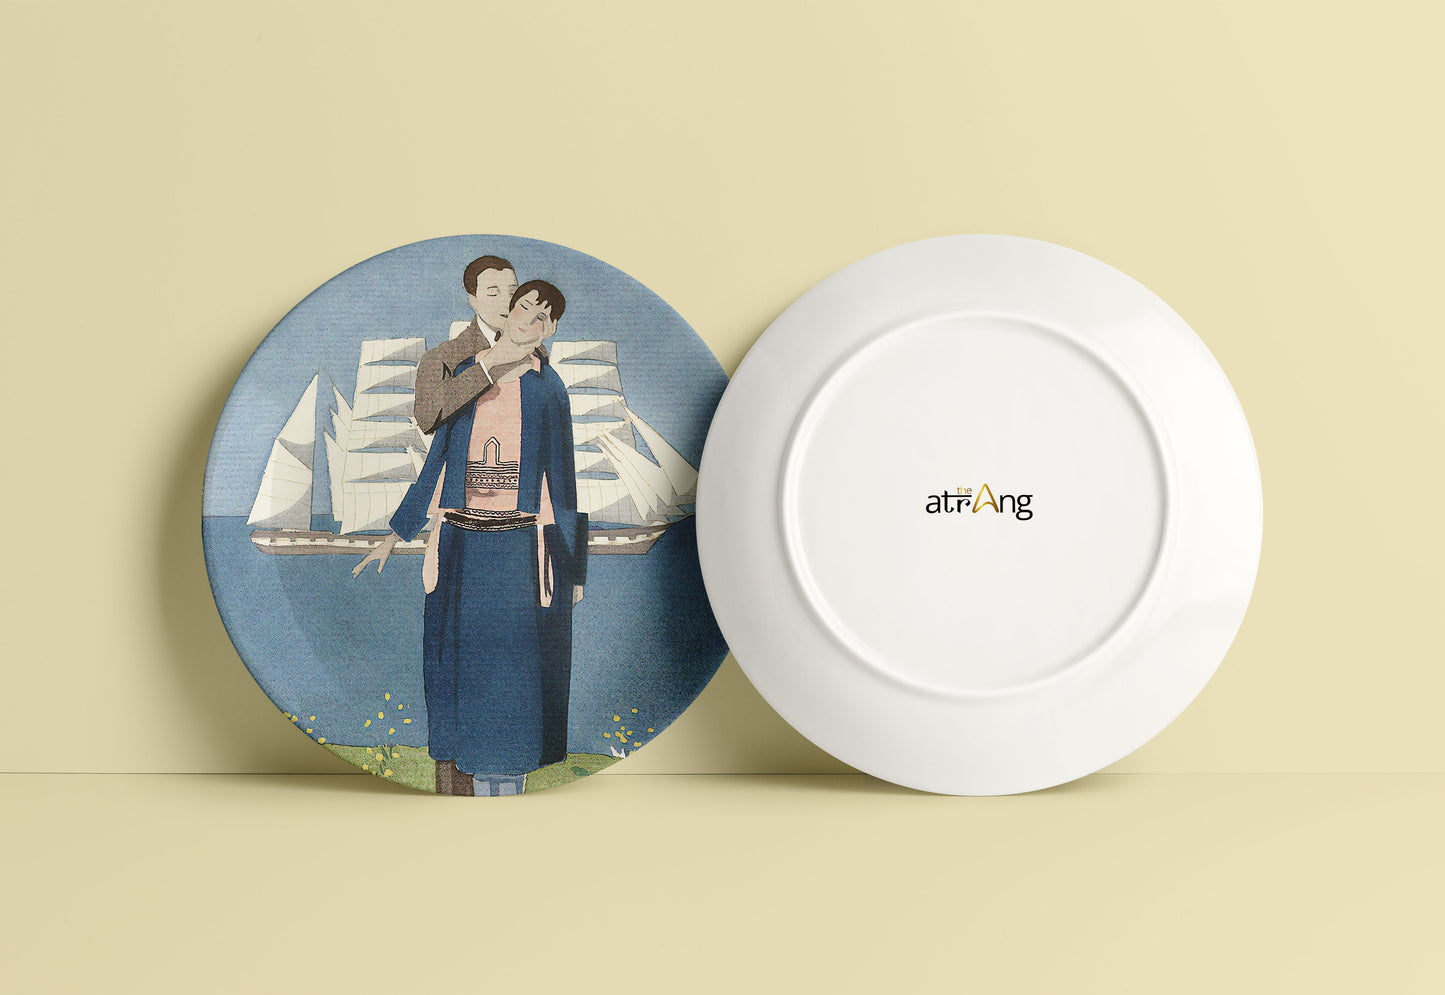 A couple standing in a school uniform on a green grass field Ceramic Plate for Home Decor